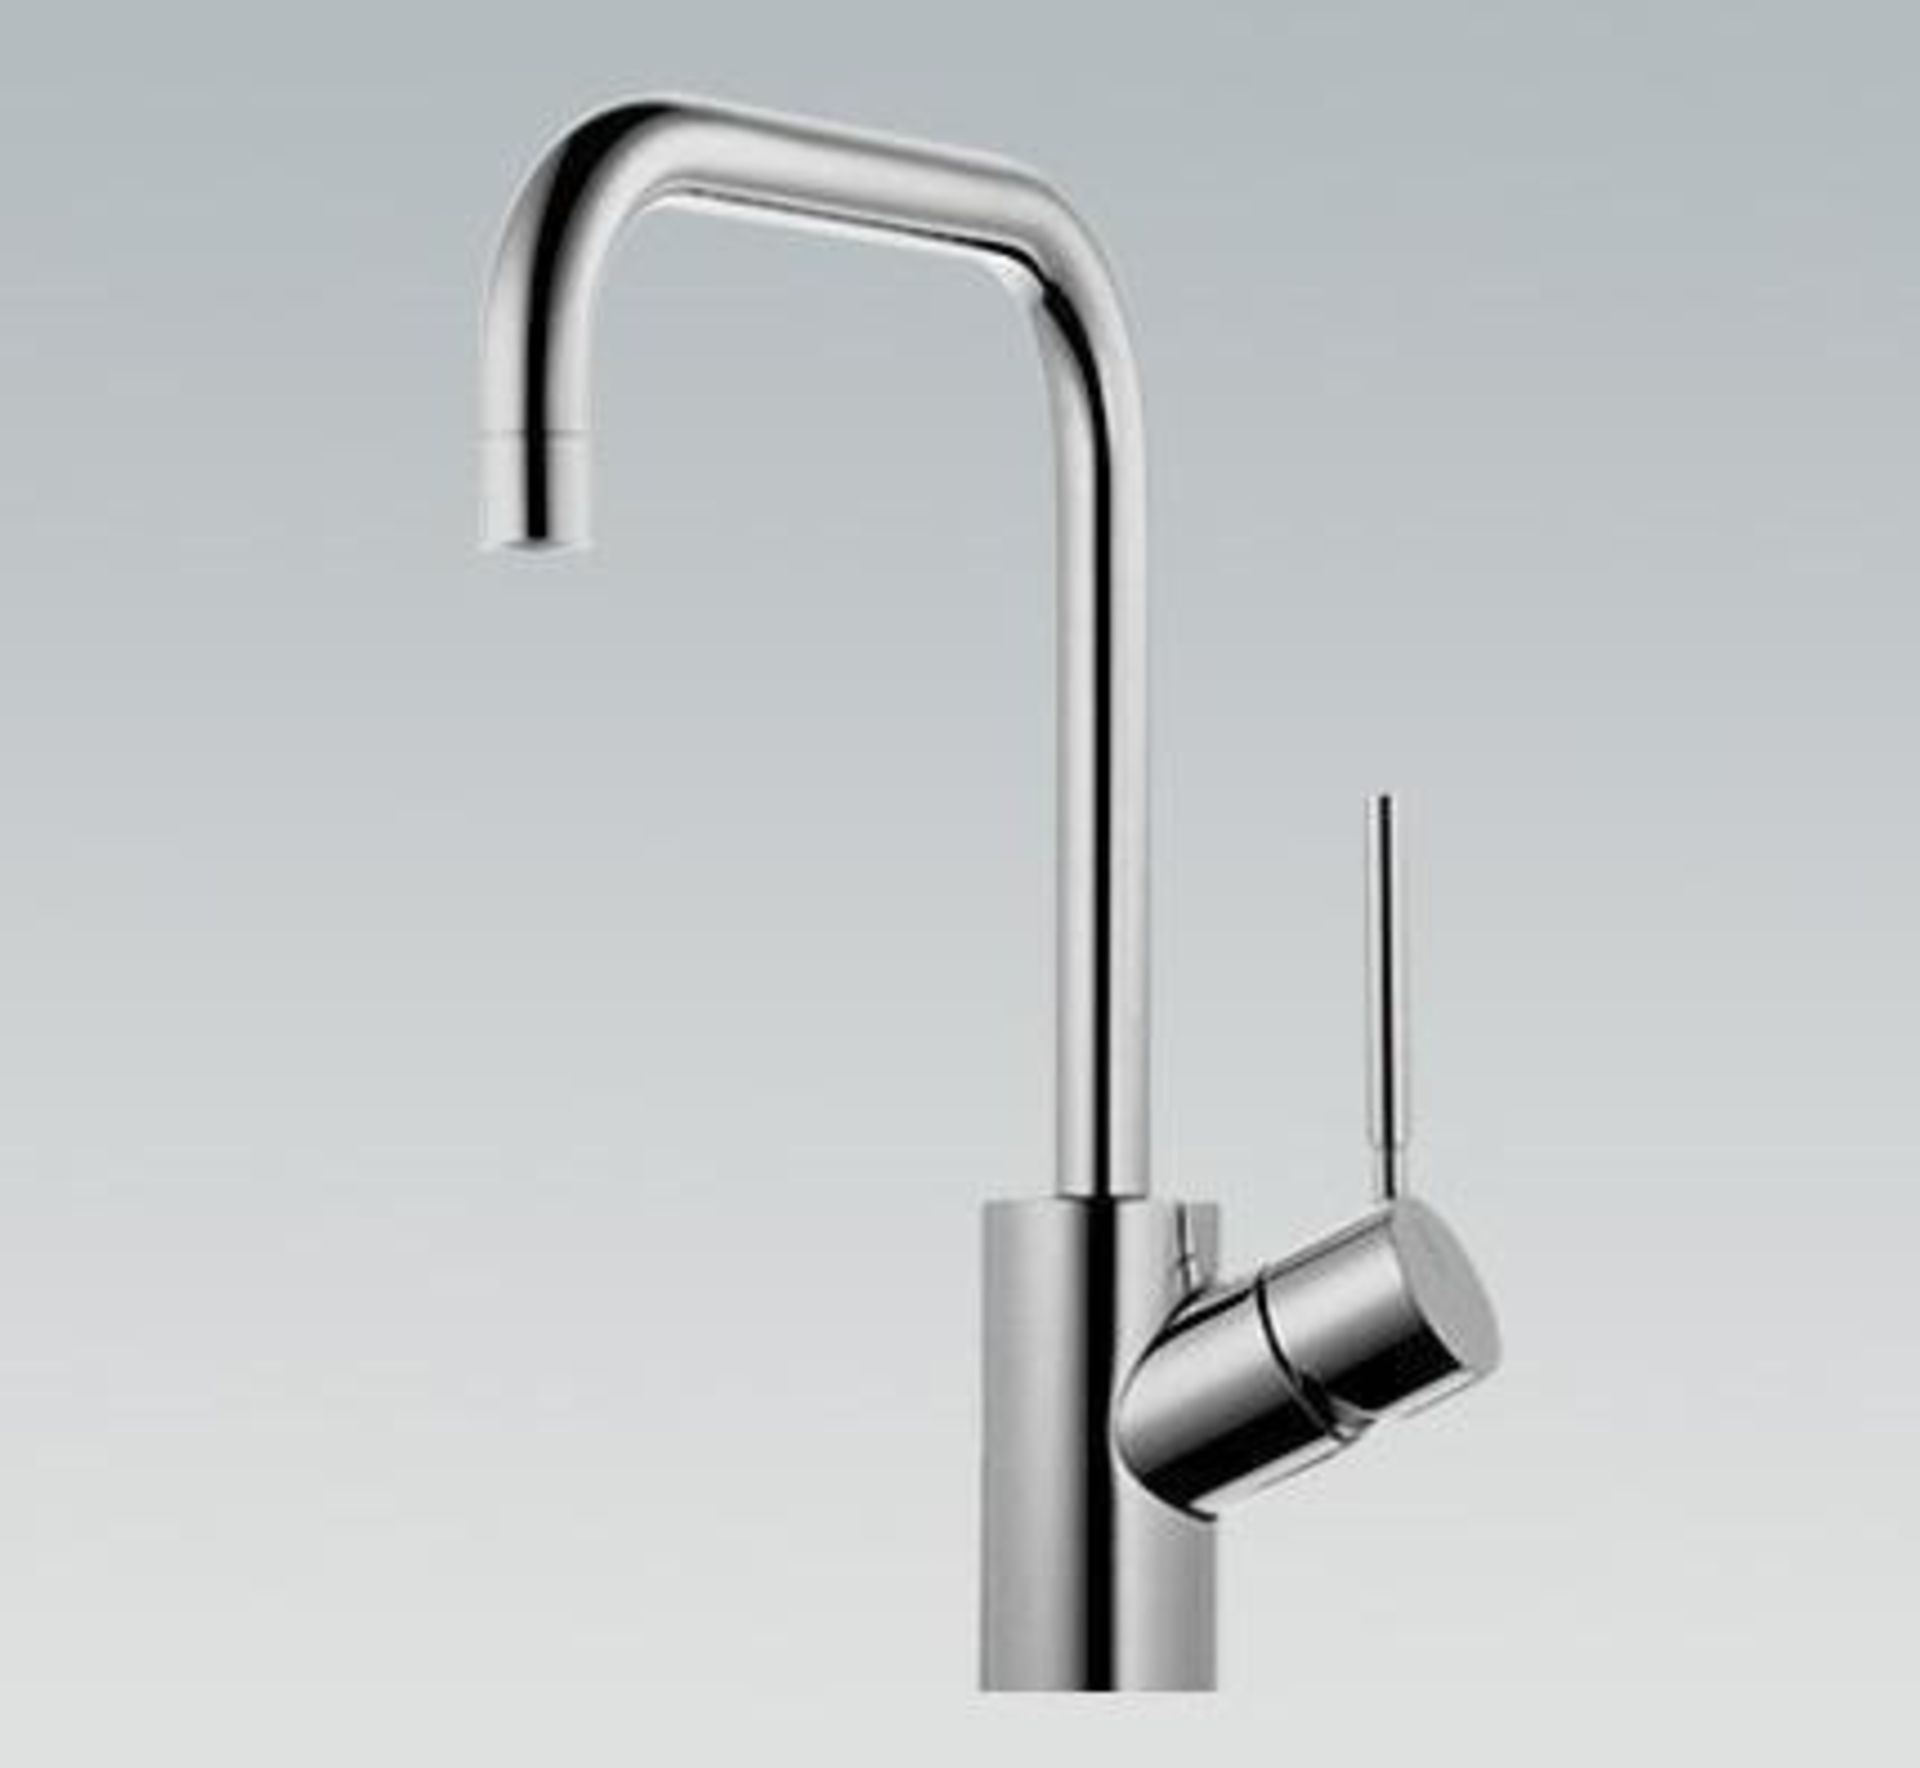 1 x Ideal Standard JADO "Geometry" A5 S/Lever Basin Mixer Tap Without Waste (F1295AA) - Projection: